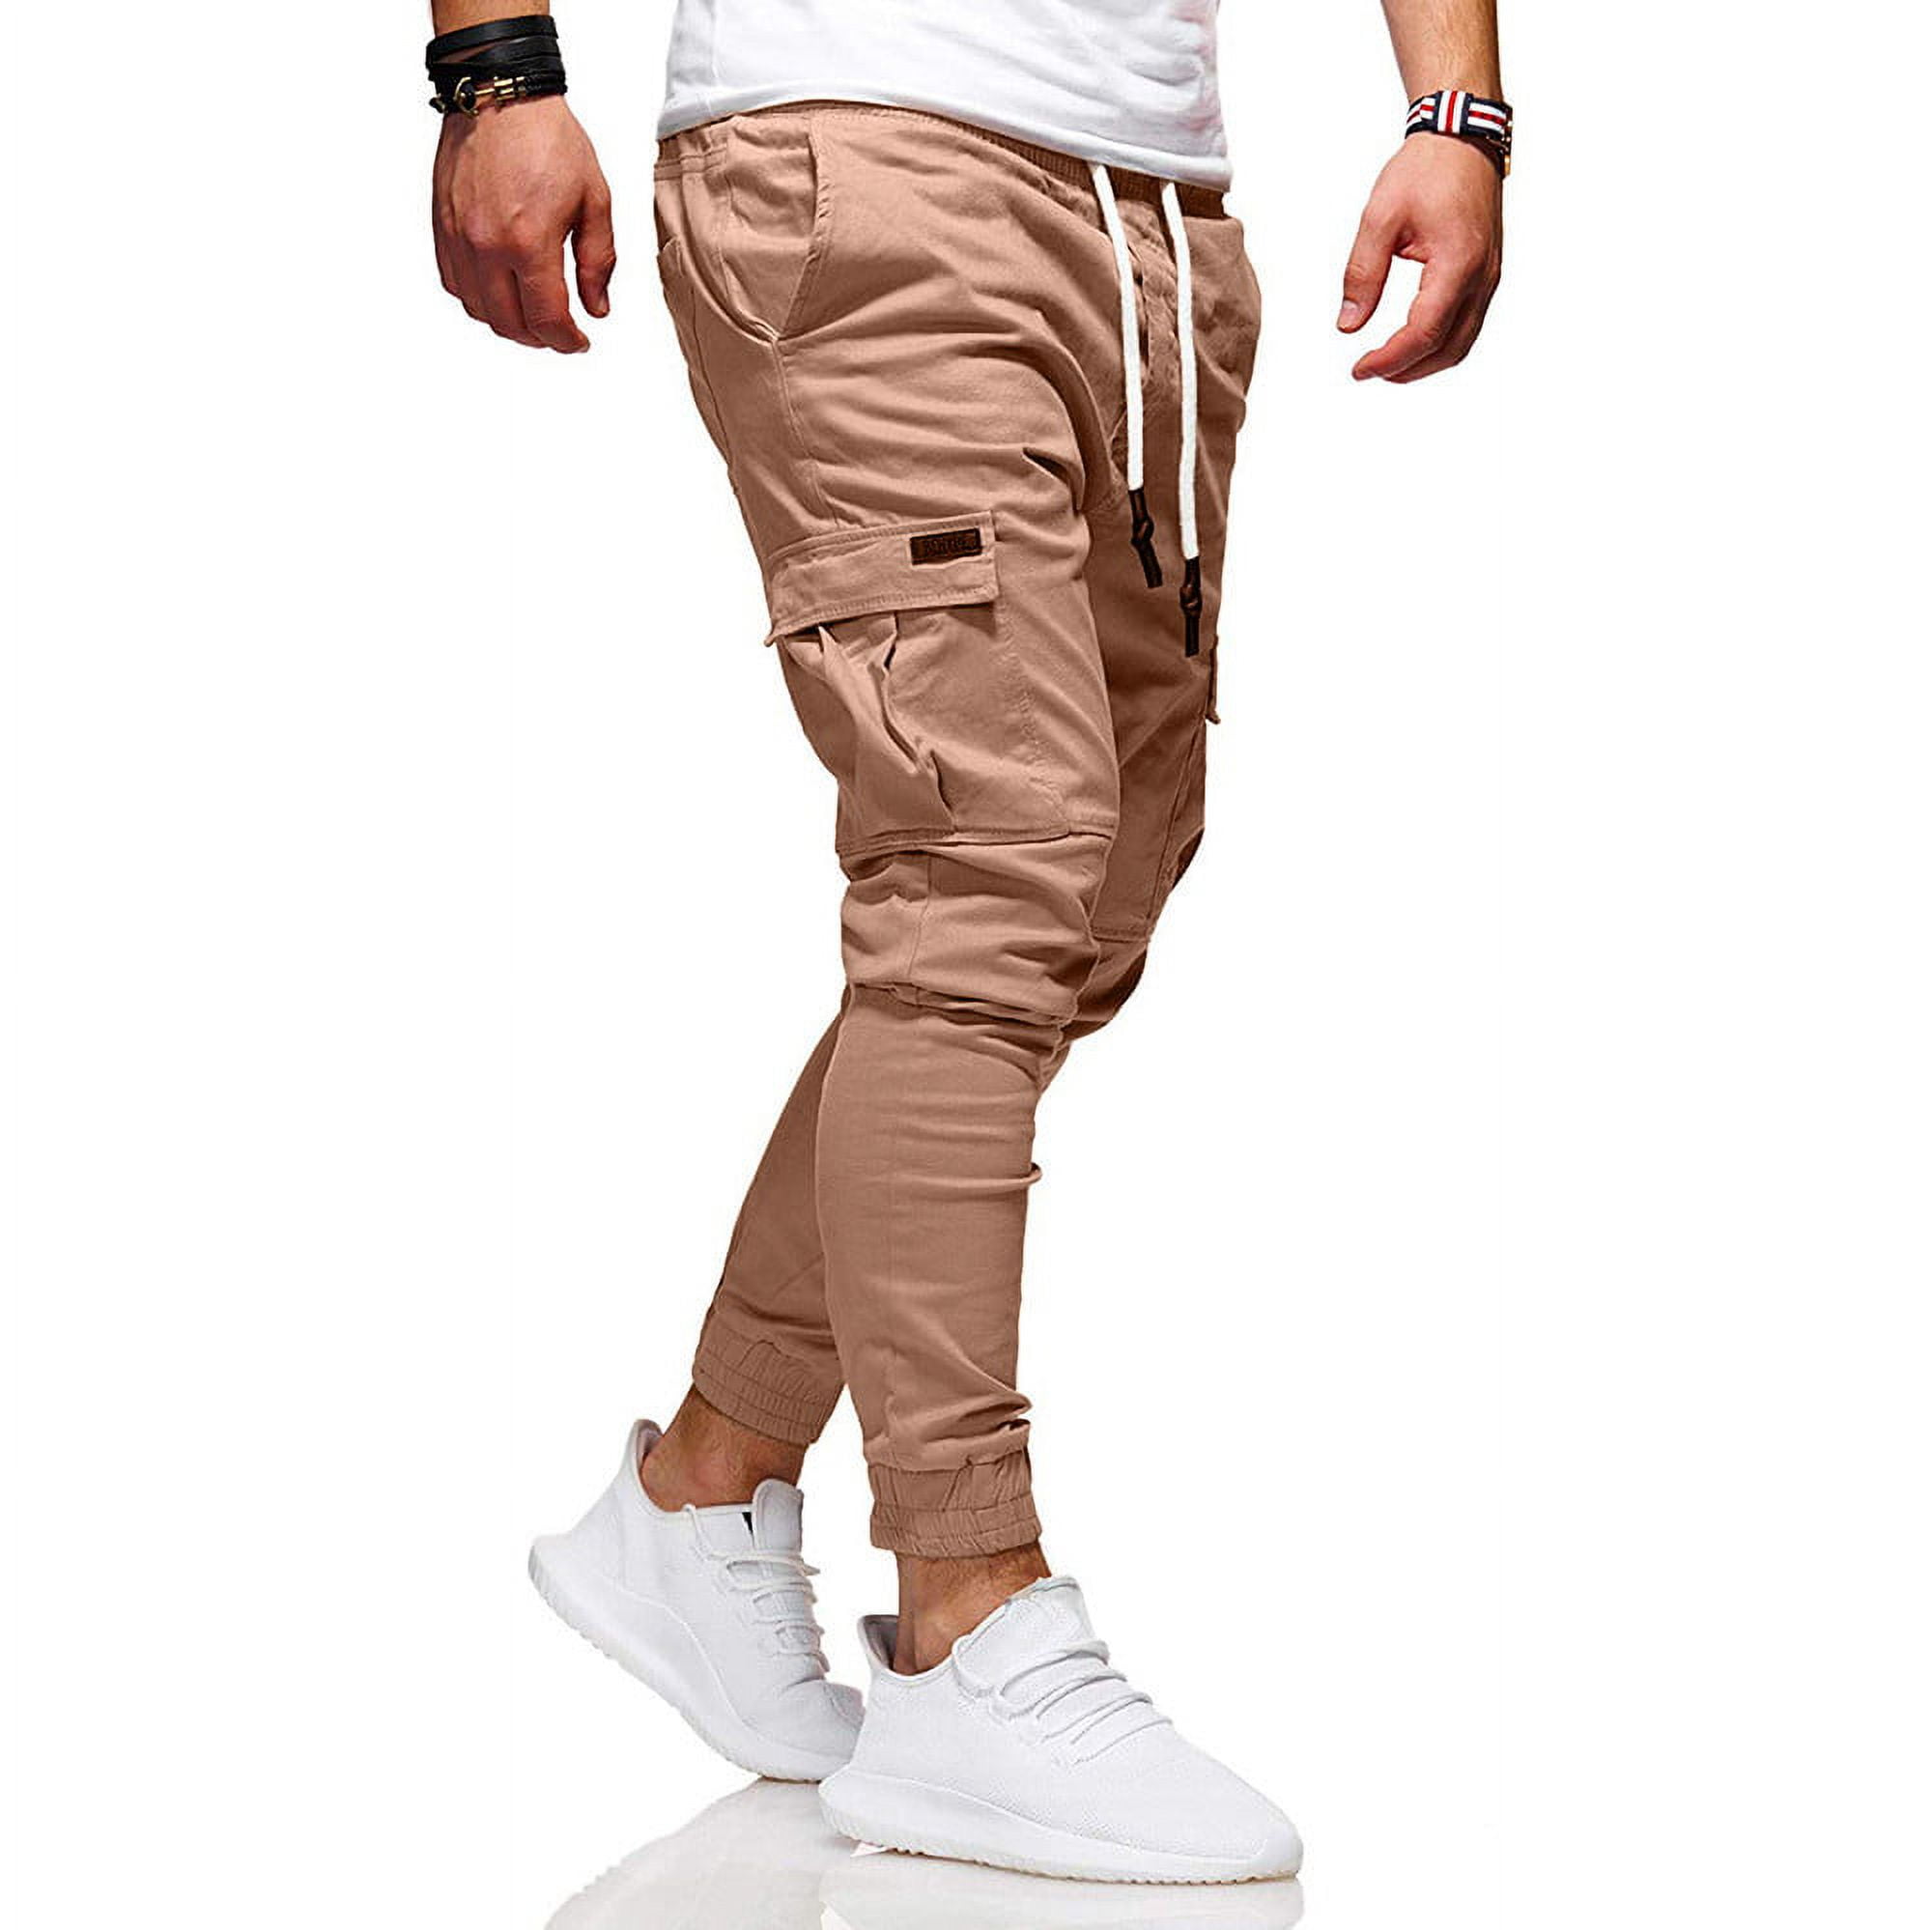 G-Star Raw Rovic Zip 3d Tapered Cargo Pants Trousers Raven Gray W32 x L34 |  eBay